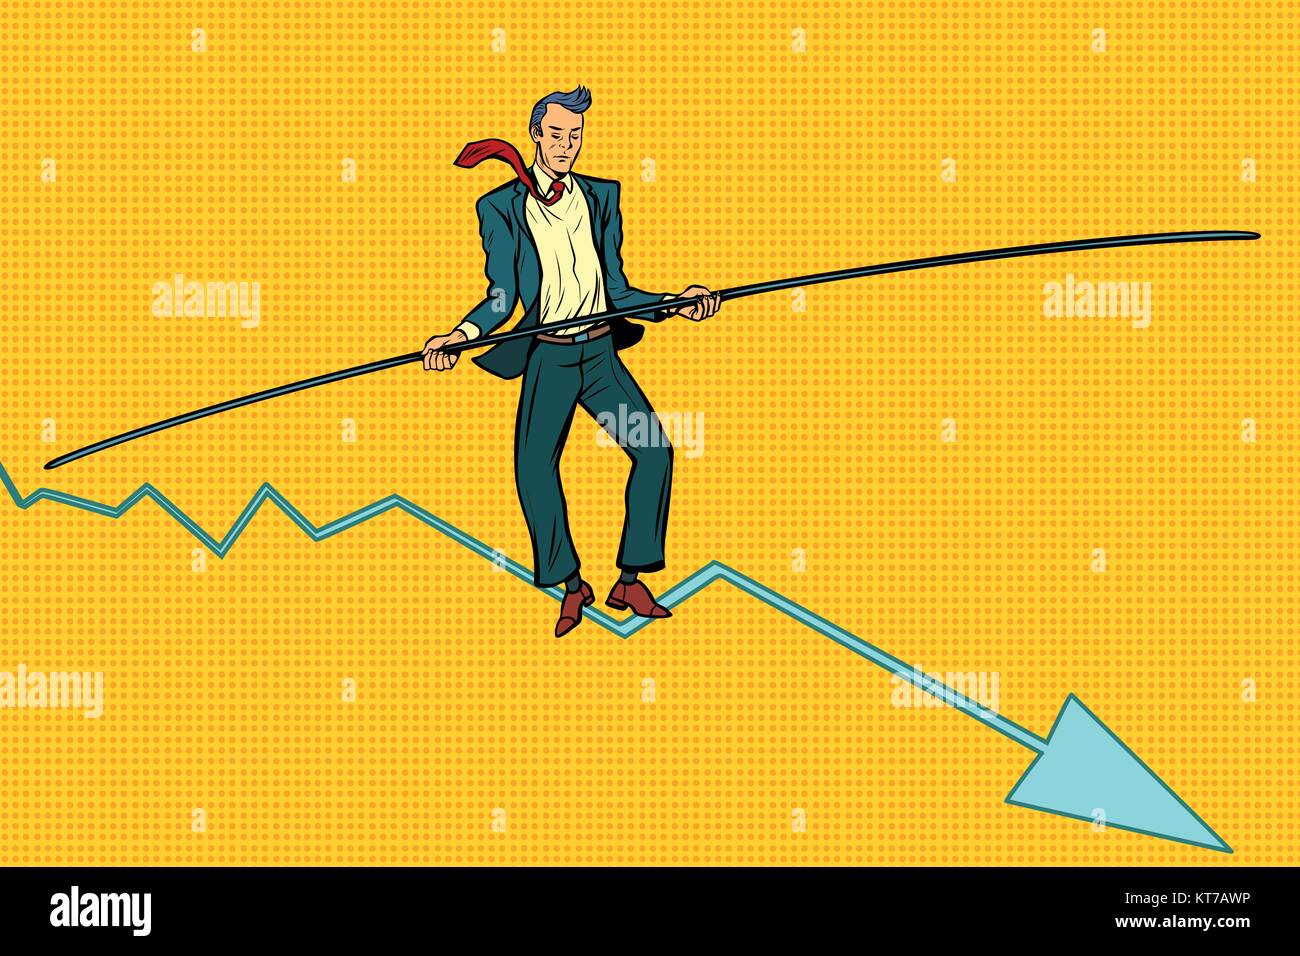 Tight rope walker Stock Vector Images - Alamy